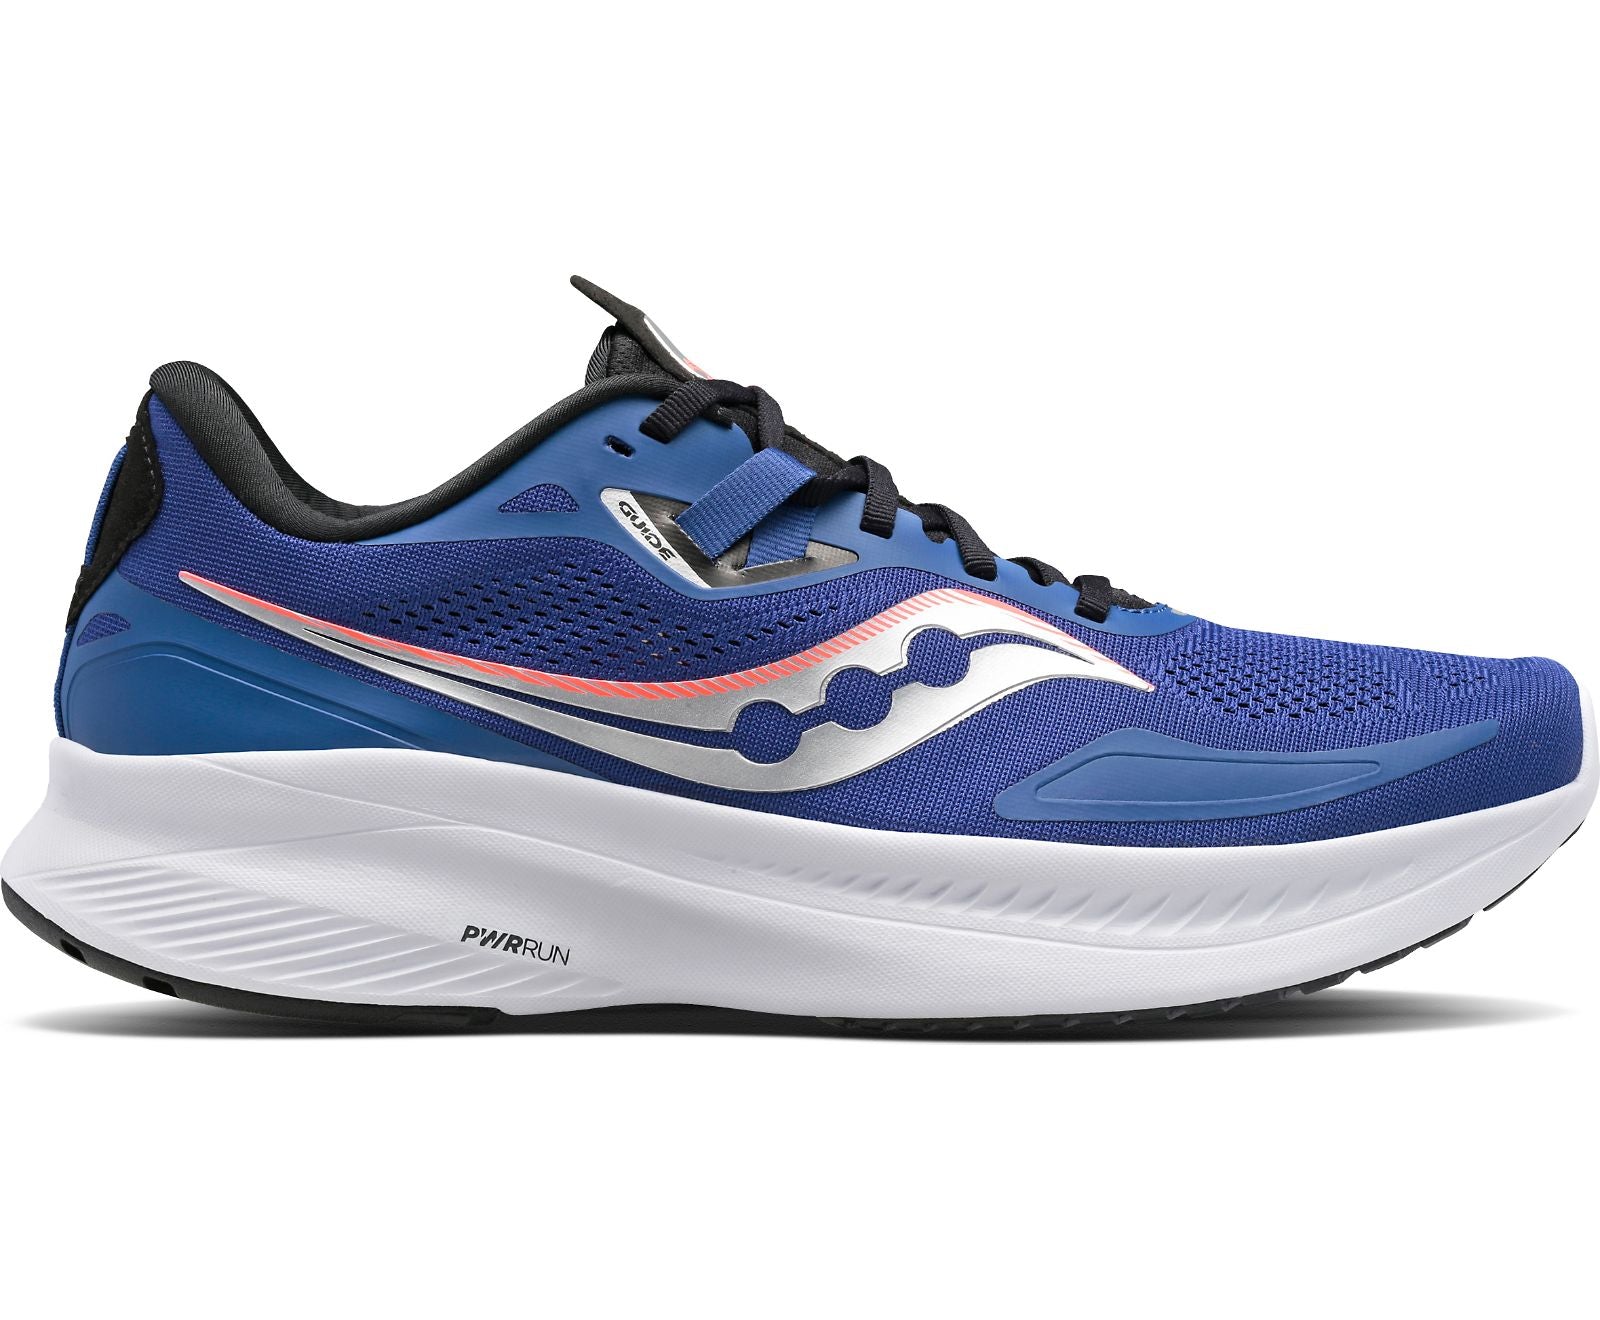 Lateral view of the Men's Guide 15 by Saucony in the wide "2E" width, color Sapphire/Black